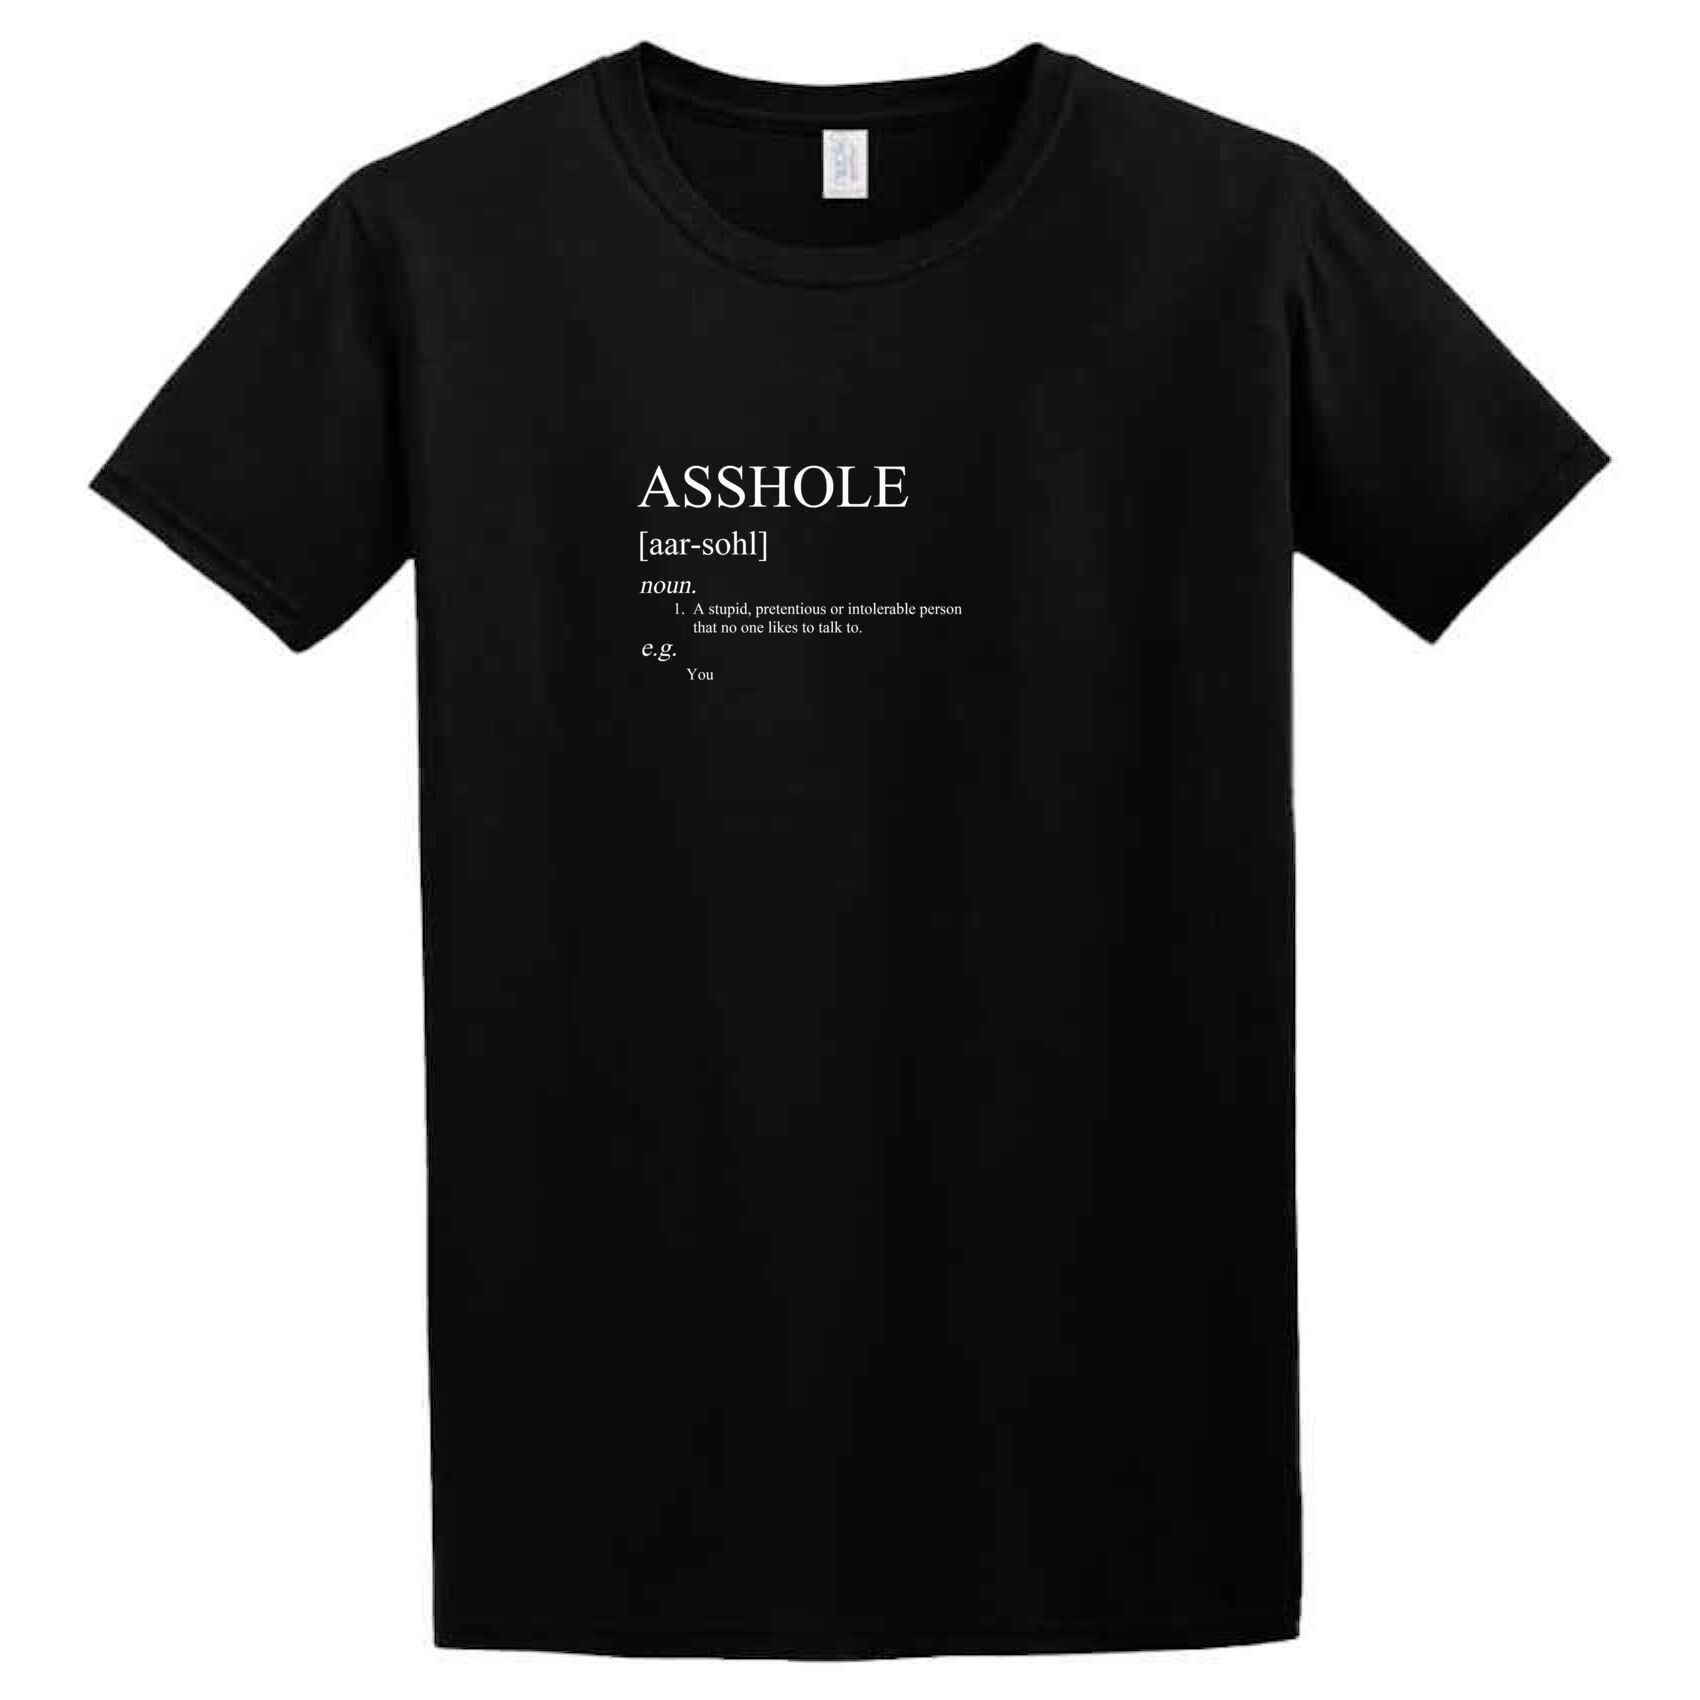 A Twisted Gifts Asshole T-Shirt.